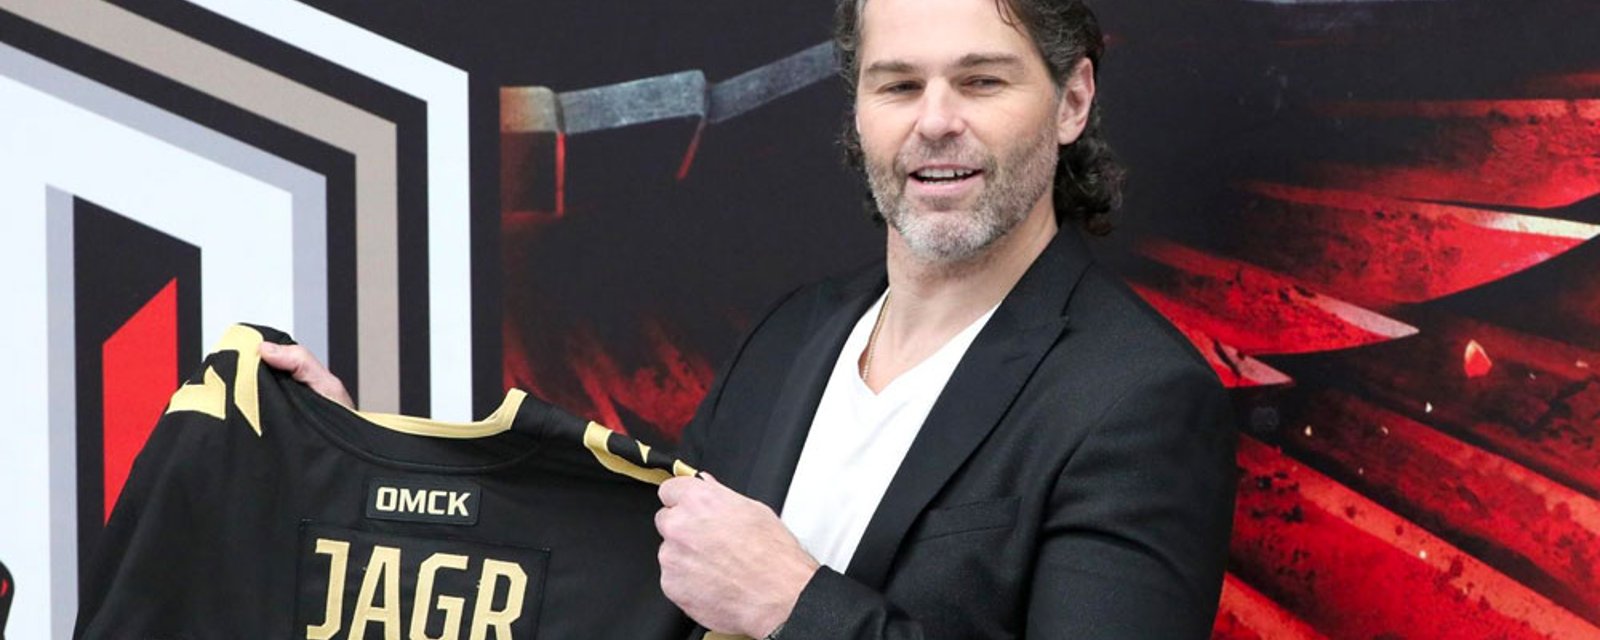 Rumor: Jagr set to sign a one year deal in the NHL